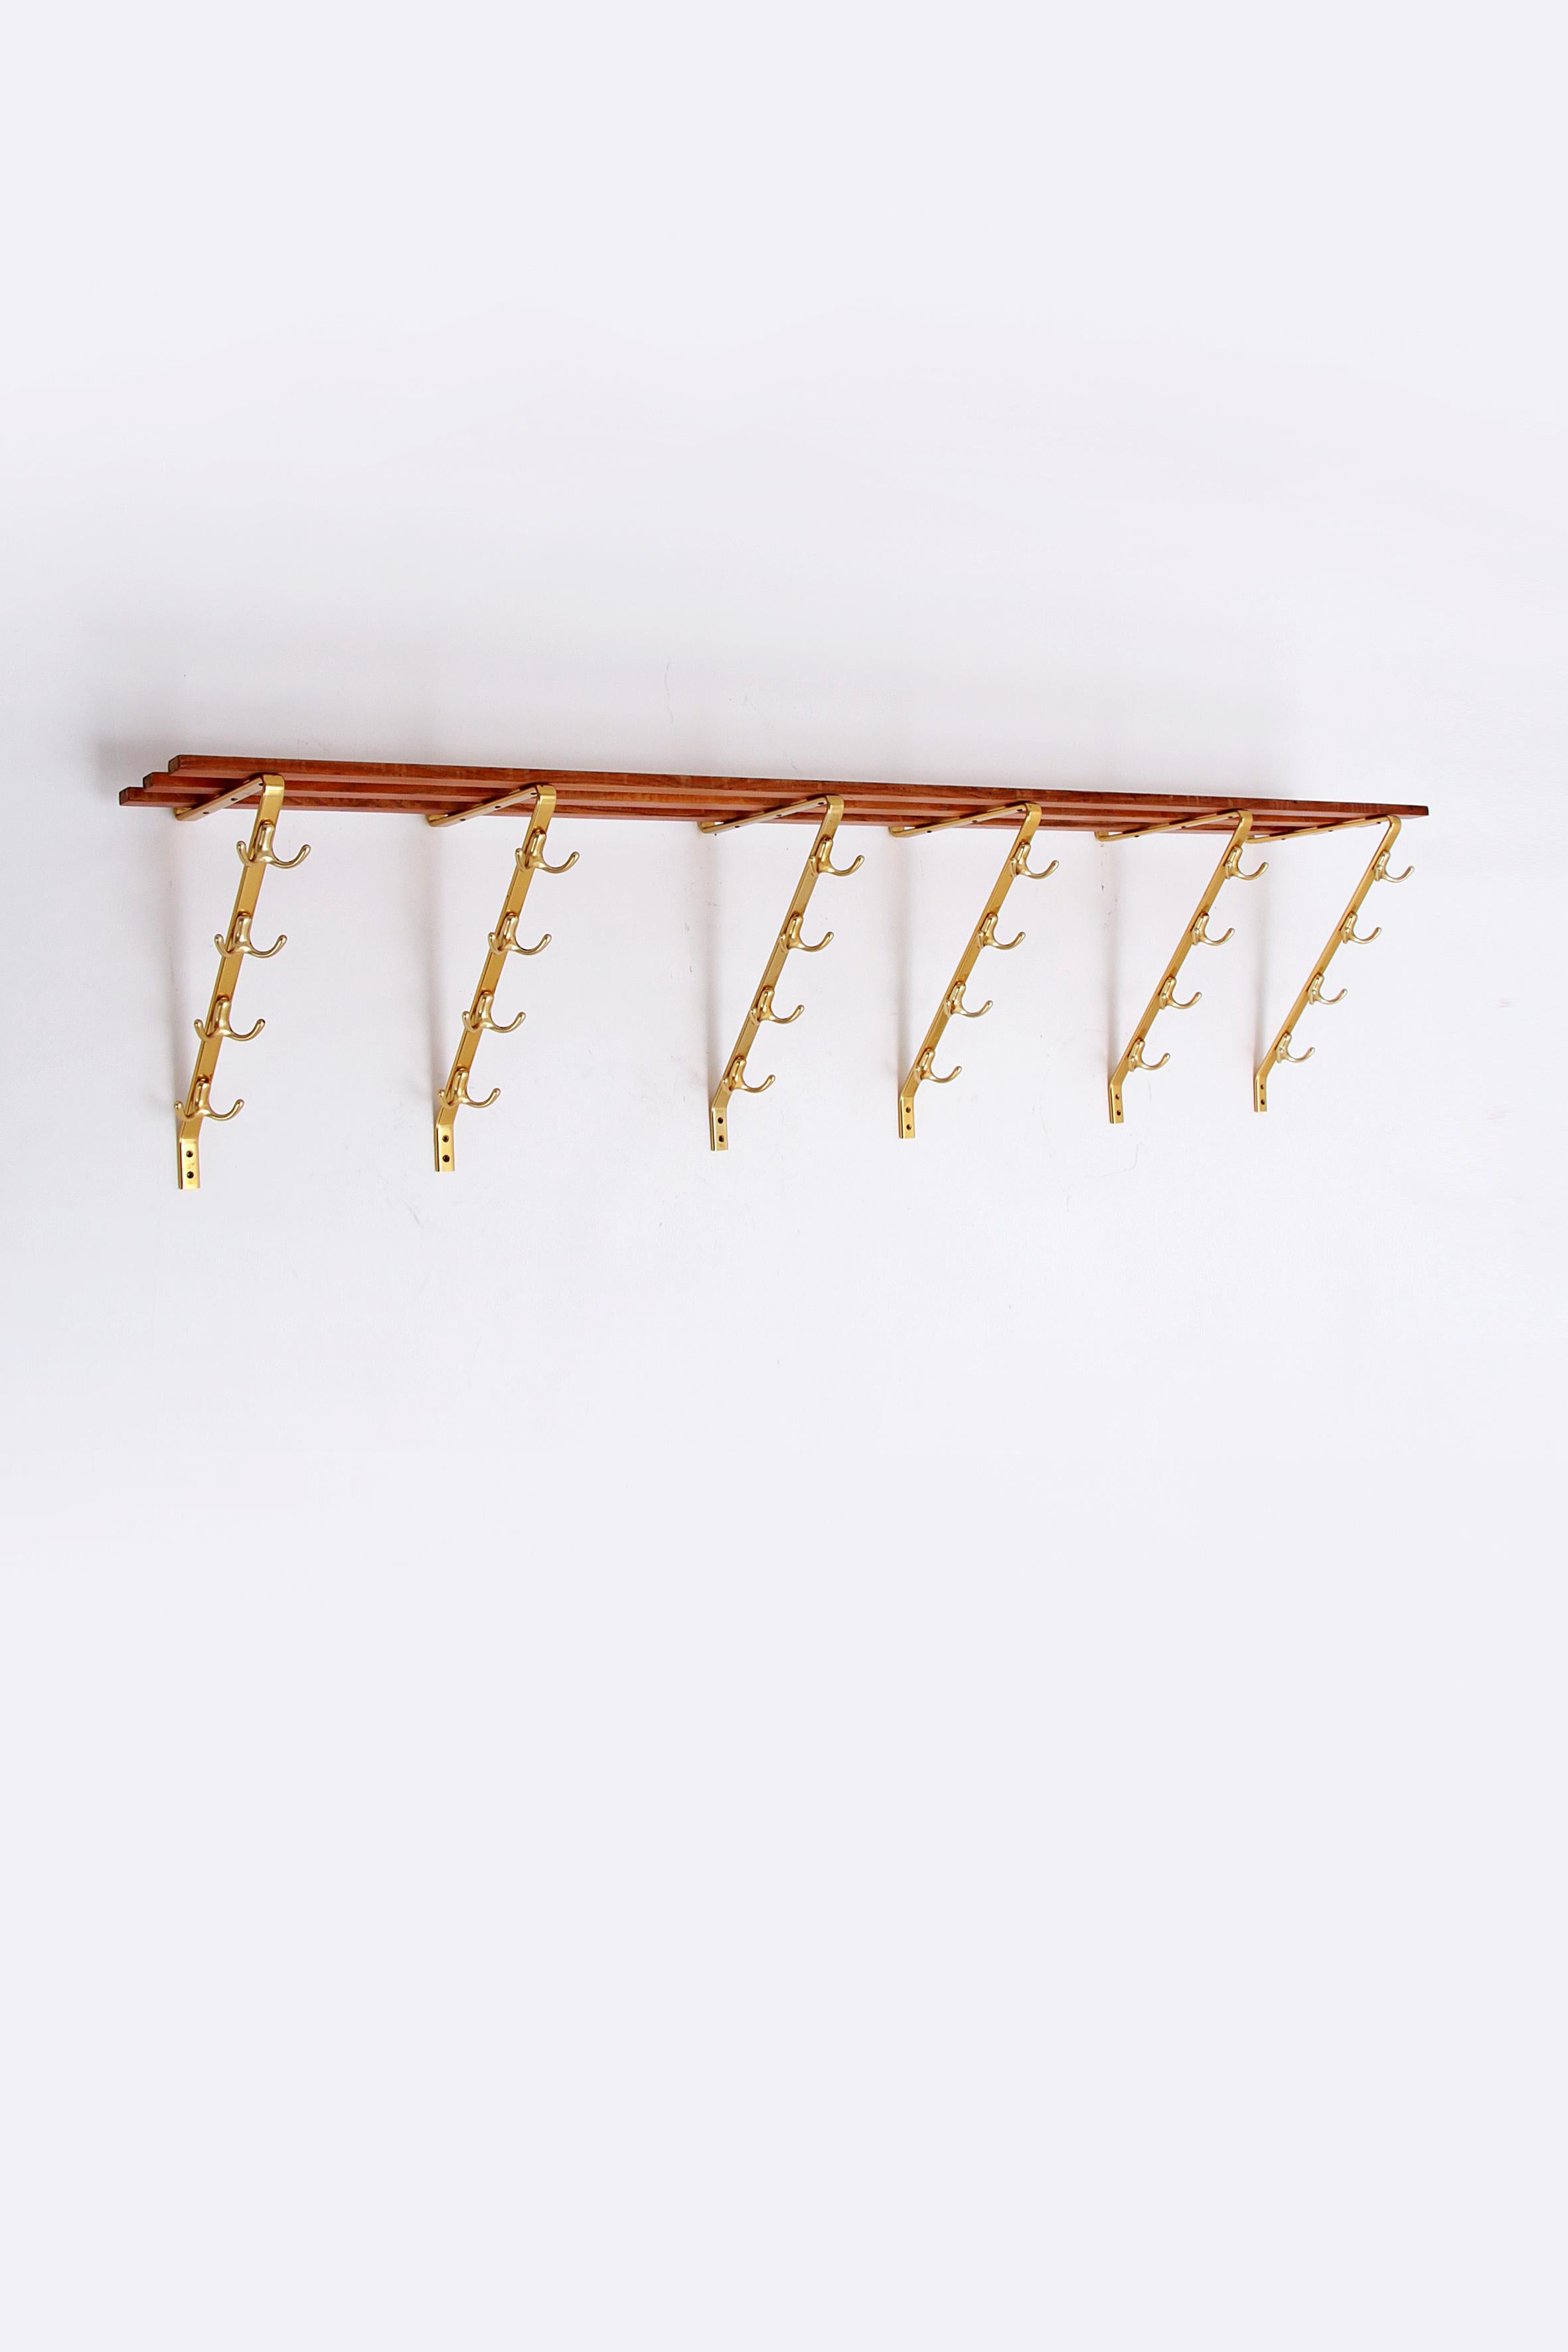 Vintage Mega large wall coat rack with 48 hooks, 1960 Germany.

Beautiful, unique, mega-large vintage coat rack with 48 hooks for your home, restaurant or practice. 

Design from the 1960s.

In a beautiful vintage style made of wood with brass